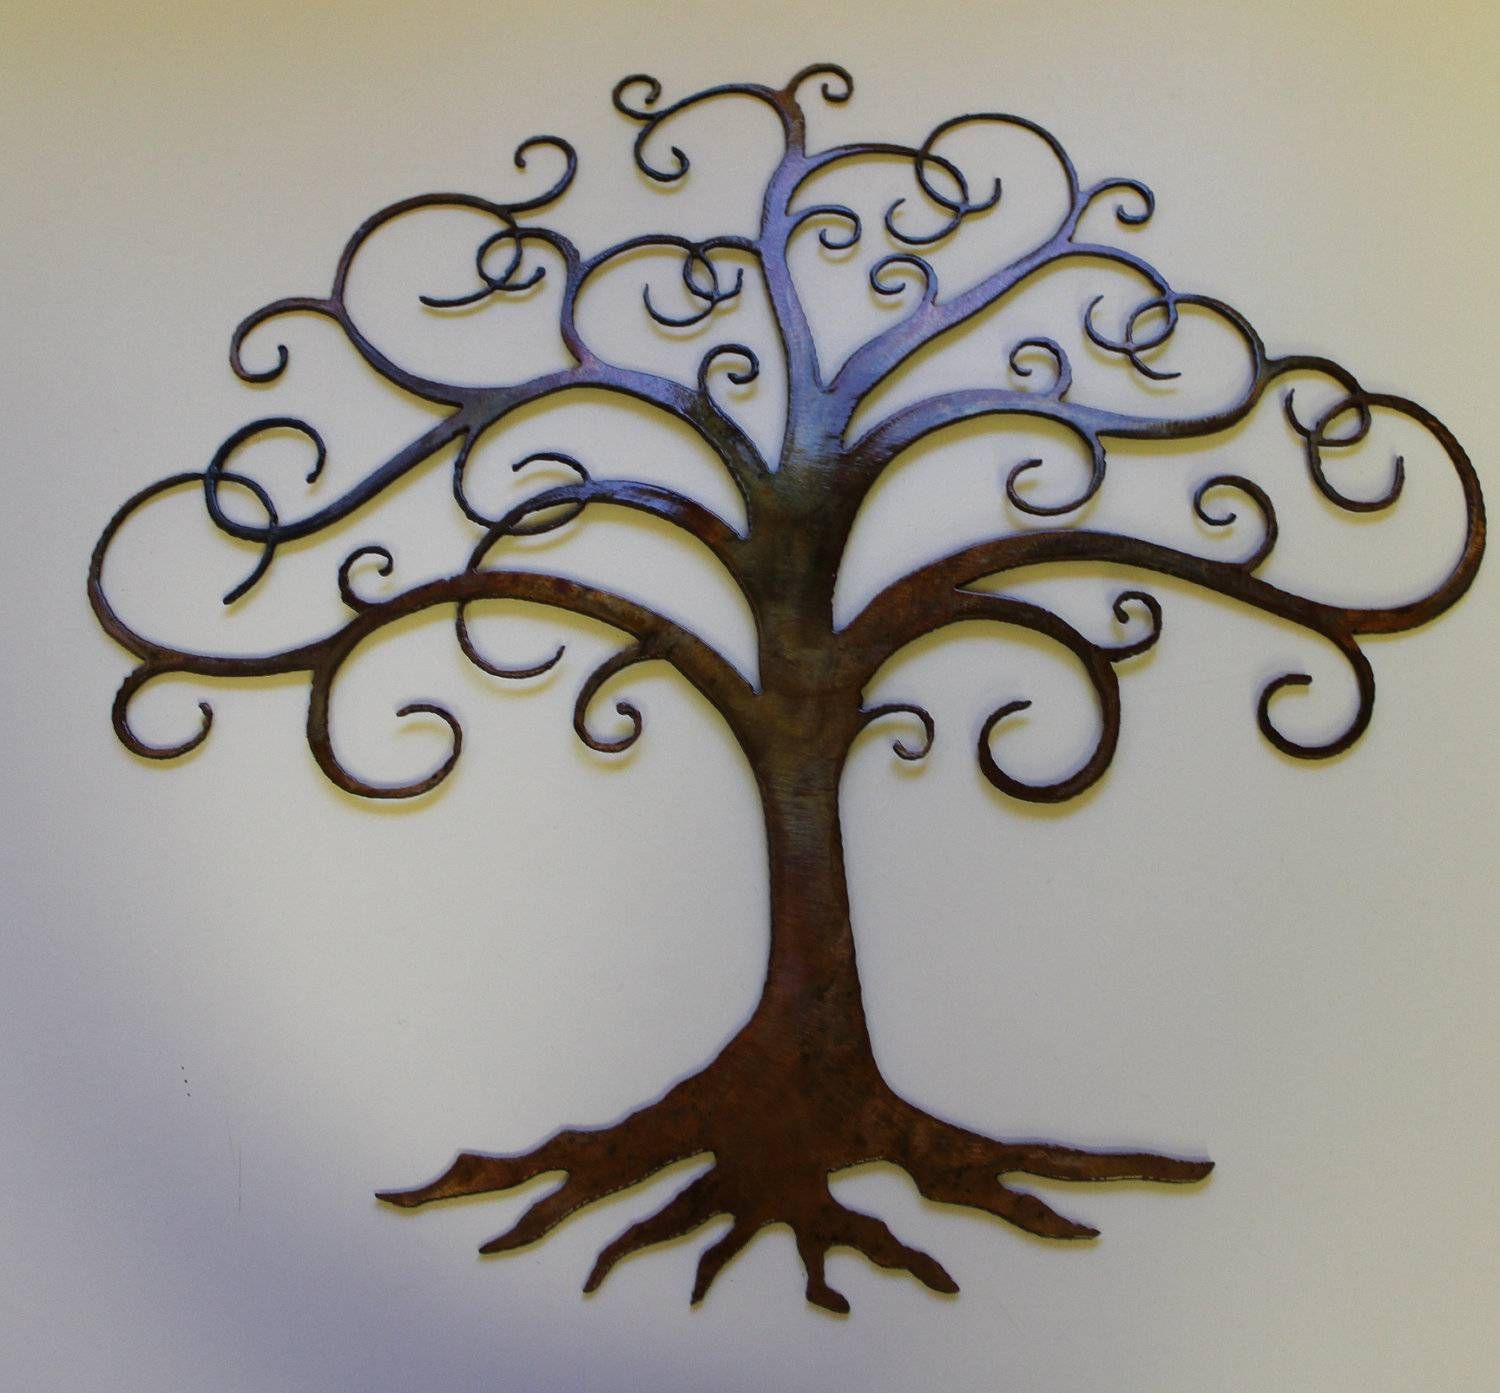 Wall Art Designs: Metal Wall Art Trees Breathtaking Large Metal With Regard To Newest Exterior Metal Wall Art (View 1 of 20)